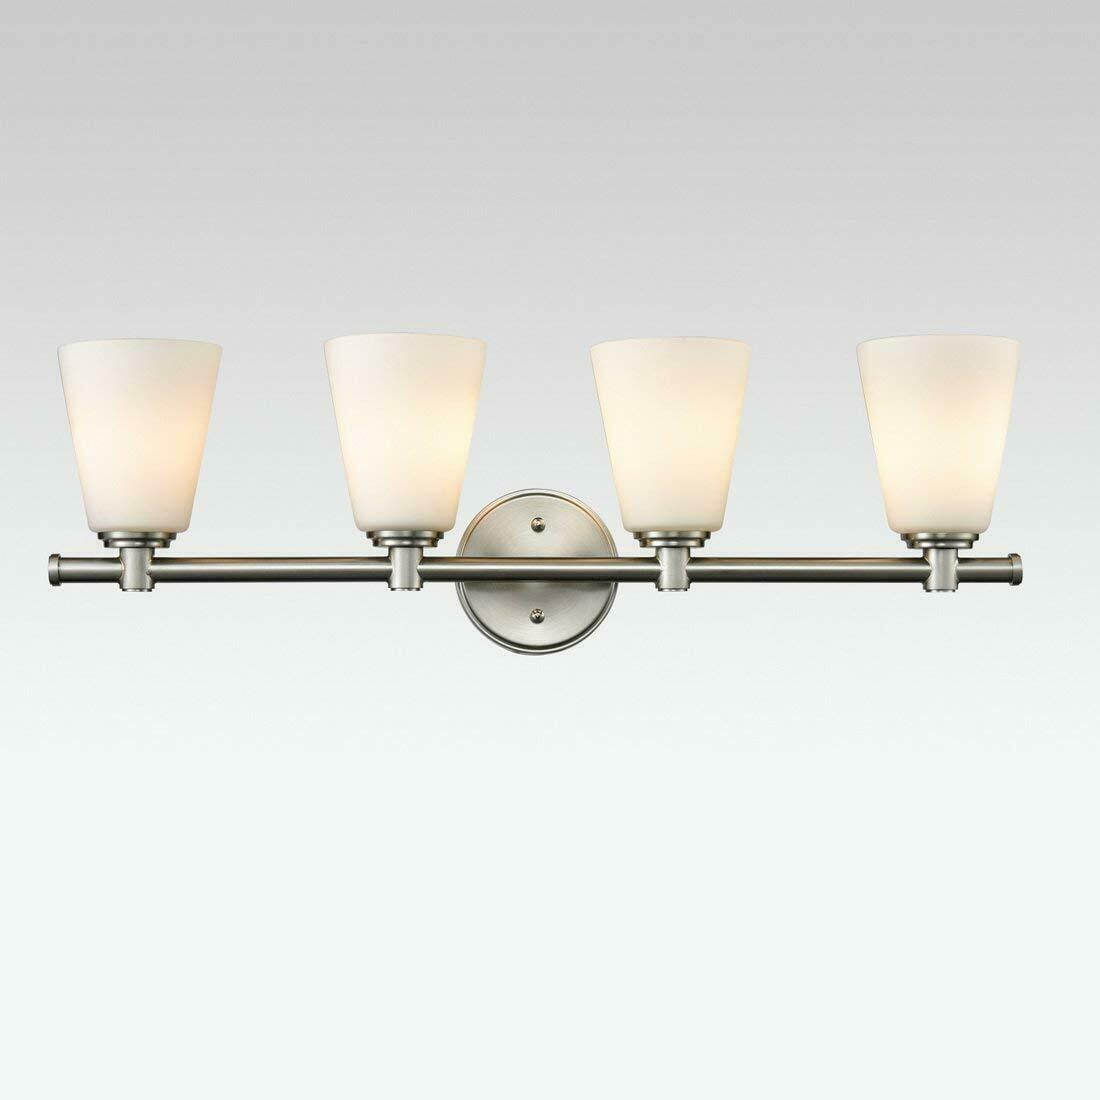 Details about   4-Light Wall Sconce Modern Bathroom Vanity Light Fixtures w/ Clear Glass Shades 